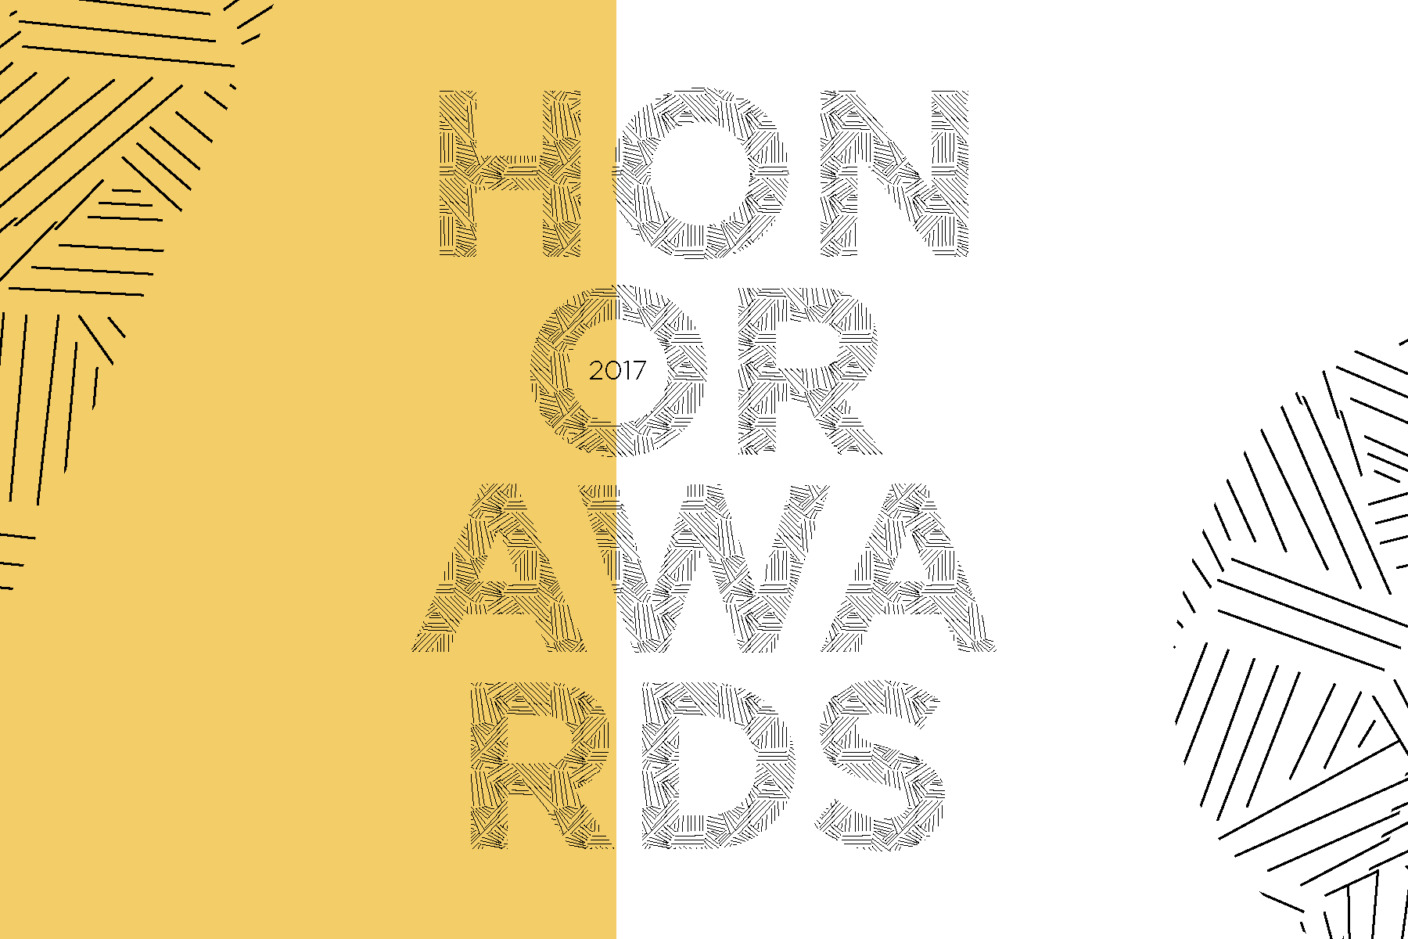 The AIA Seattle Honor Awards are the ideal platform to recognize the diverse perspectives, scales, and typologies of architecture in our region.